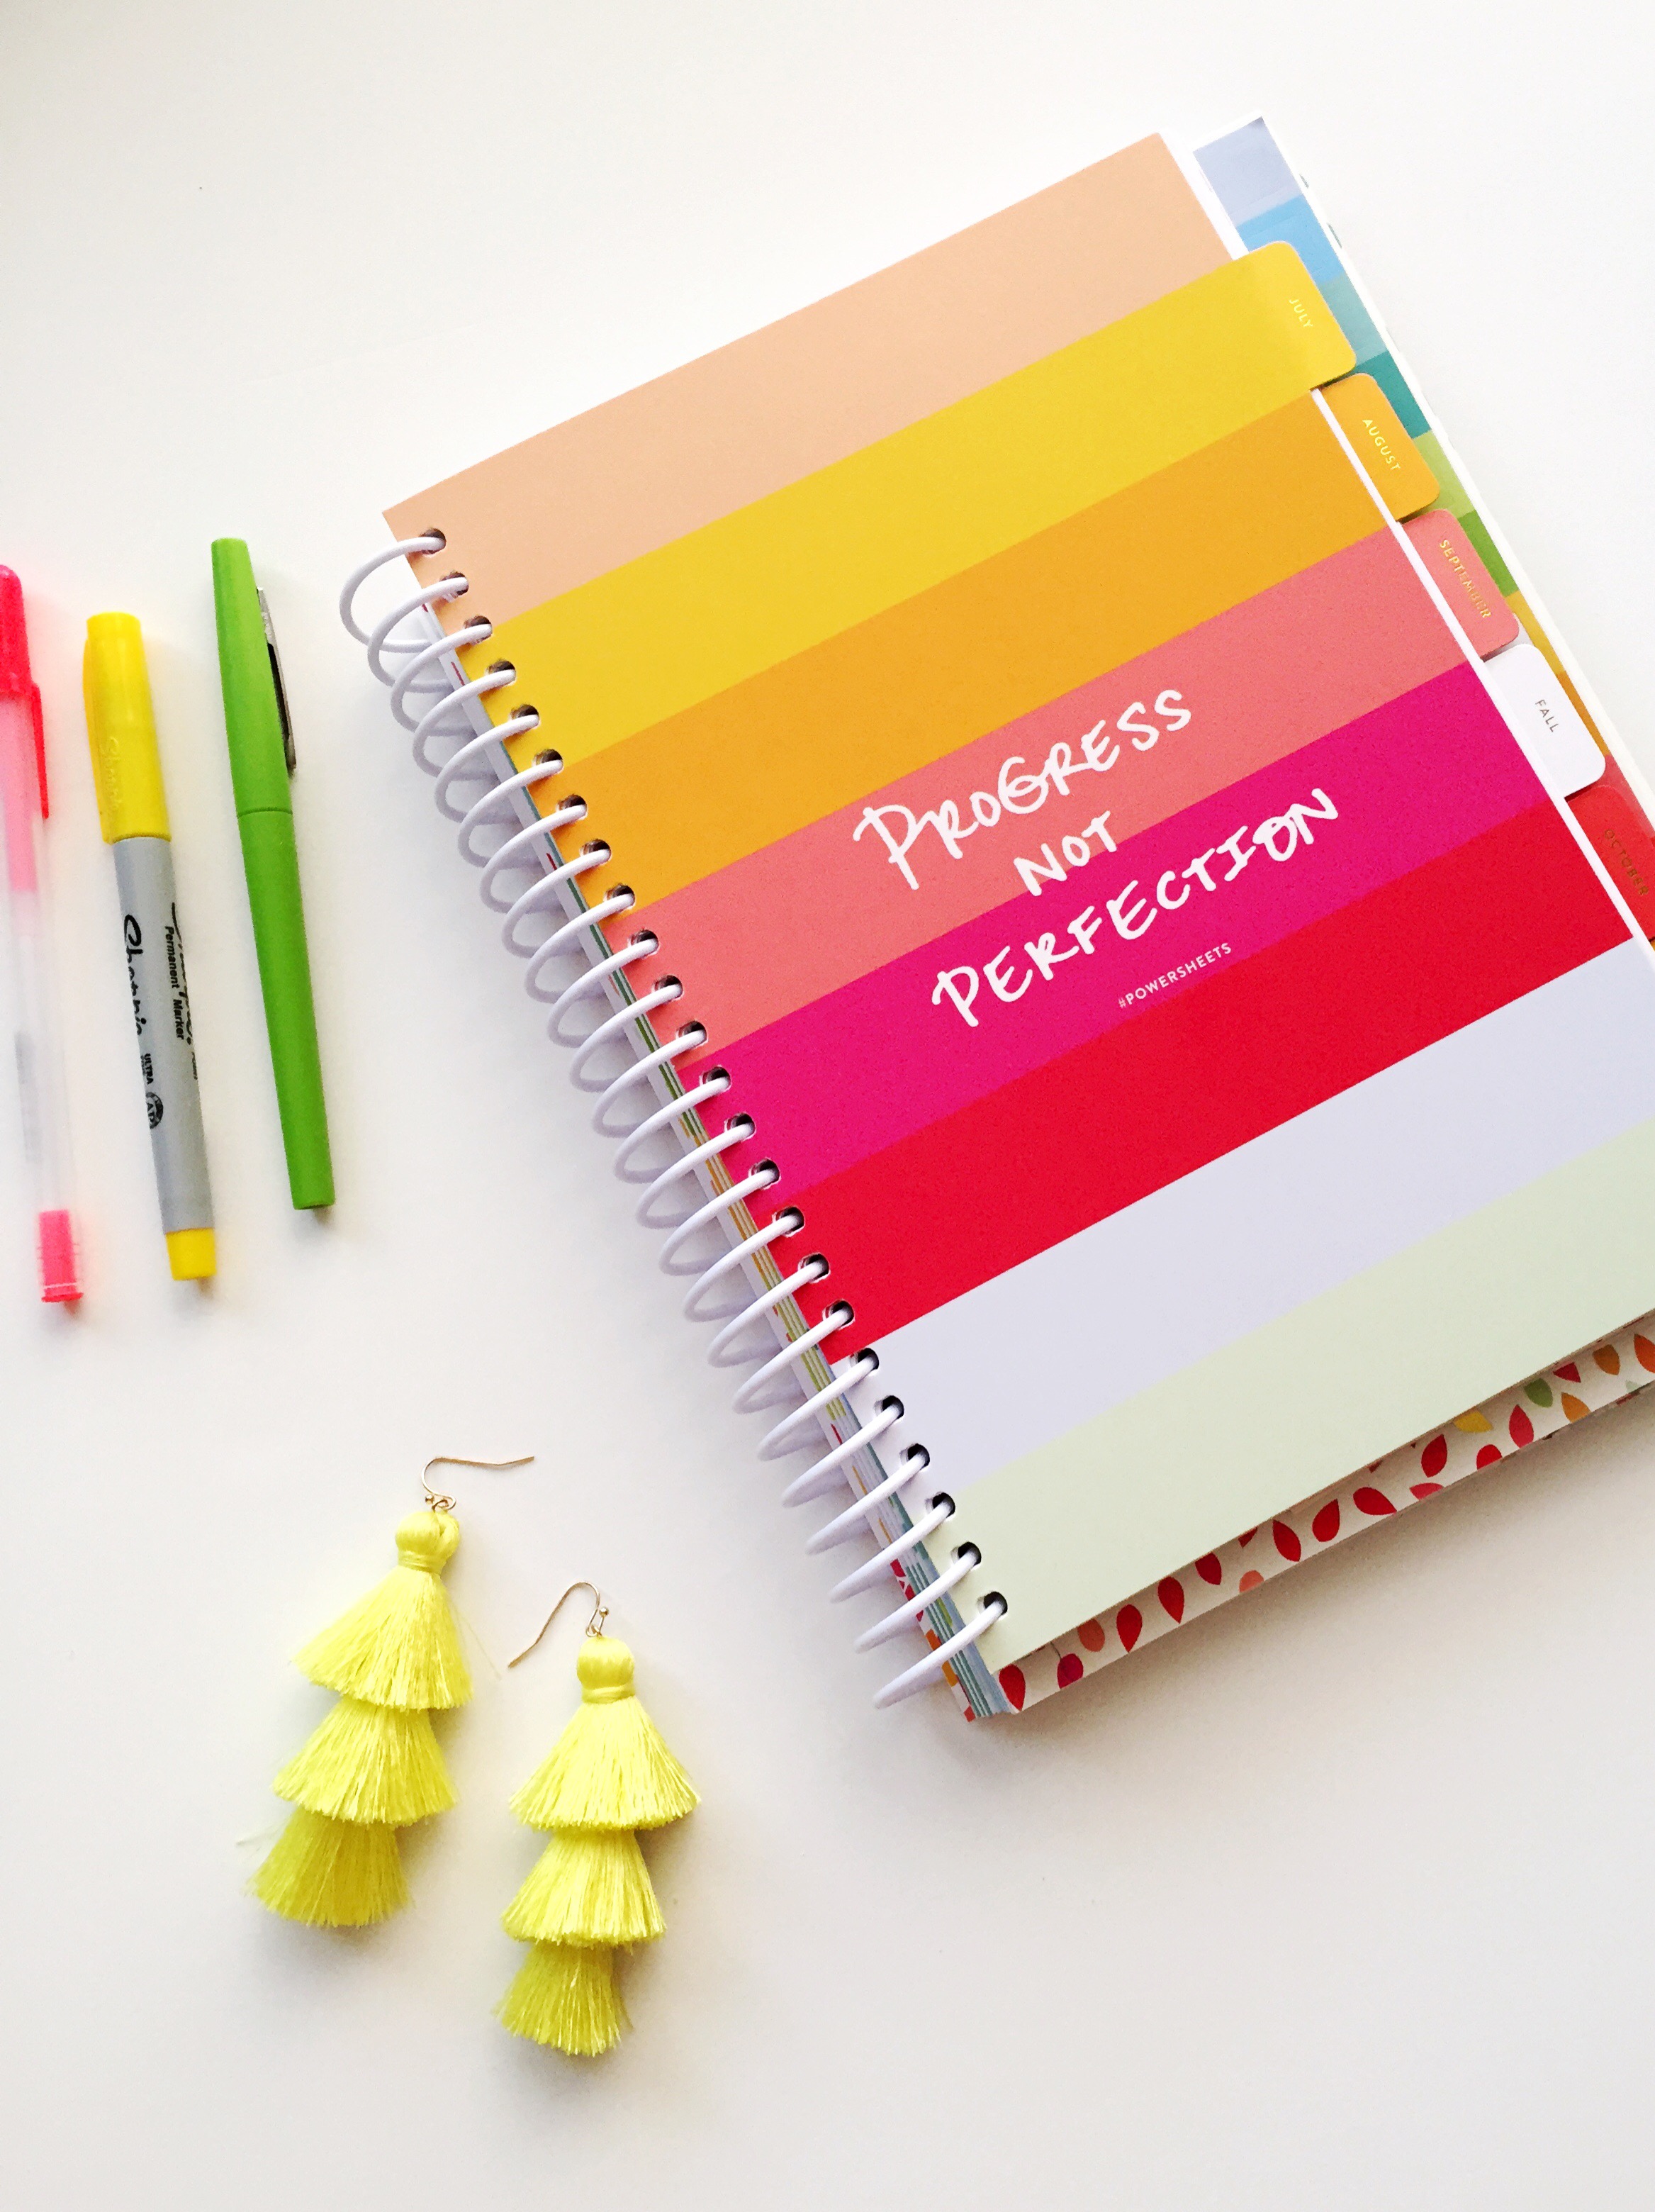 How to Plan Goals / How to Set Goals and Achieve Them / Goal Setting / Powersheets 2019 Intentional Goal Planner / Lara Casey Powersheets / See my 2019 Goals on Sunshine Style, www.thesunshinestyle.com